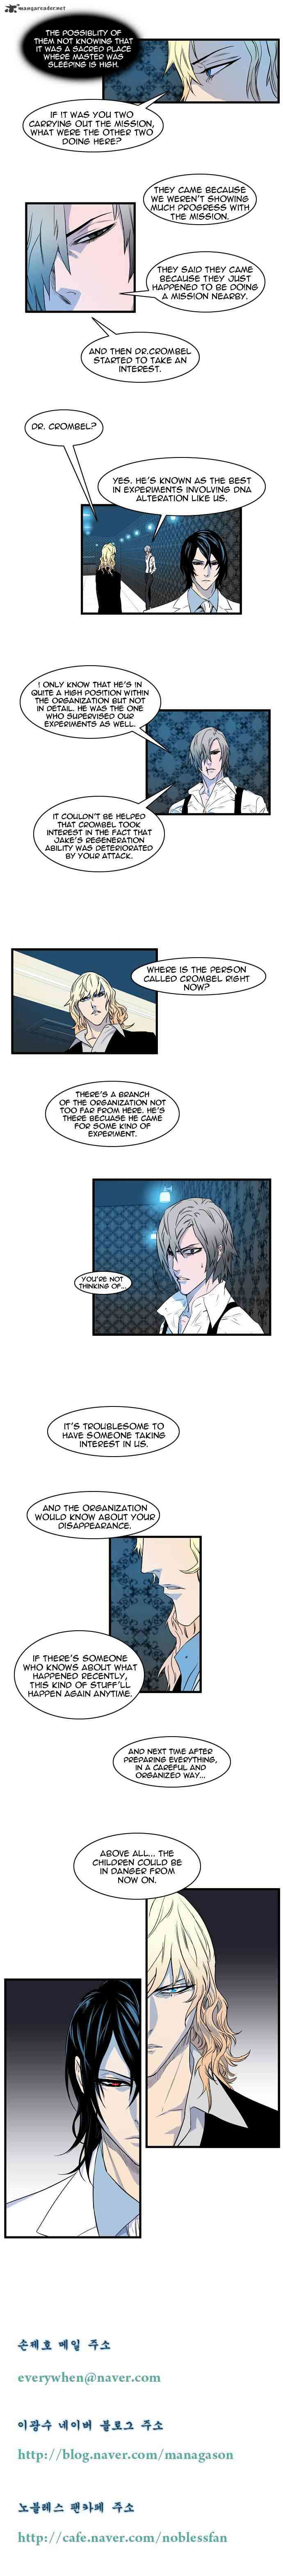 Noblesse Chapter 76 _ Chapters 76-90 page 34